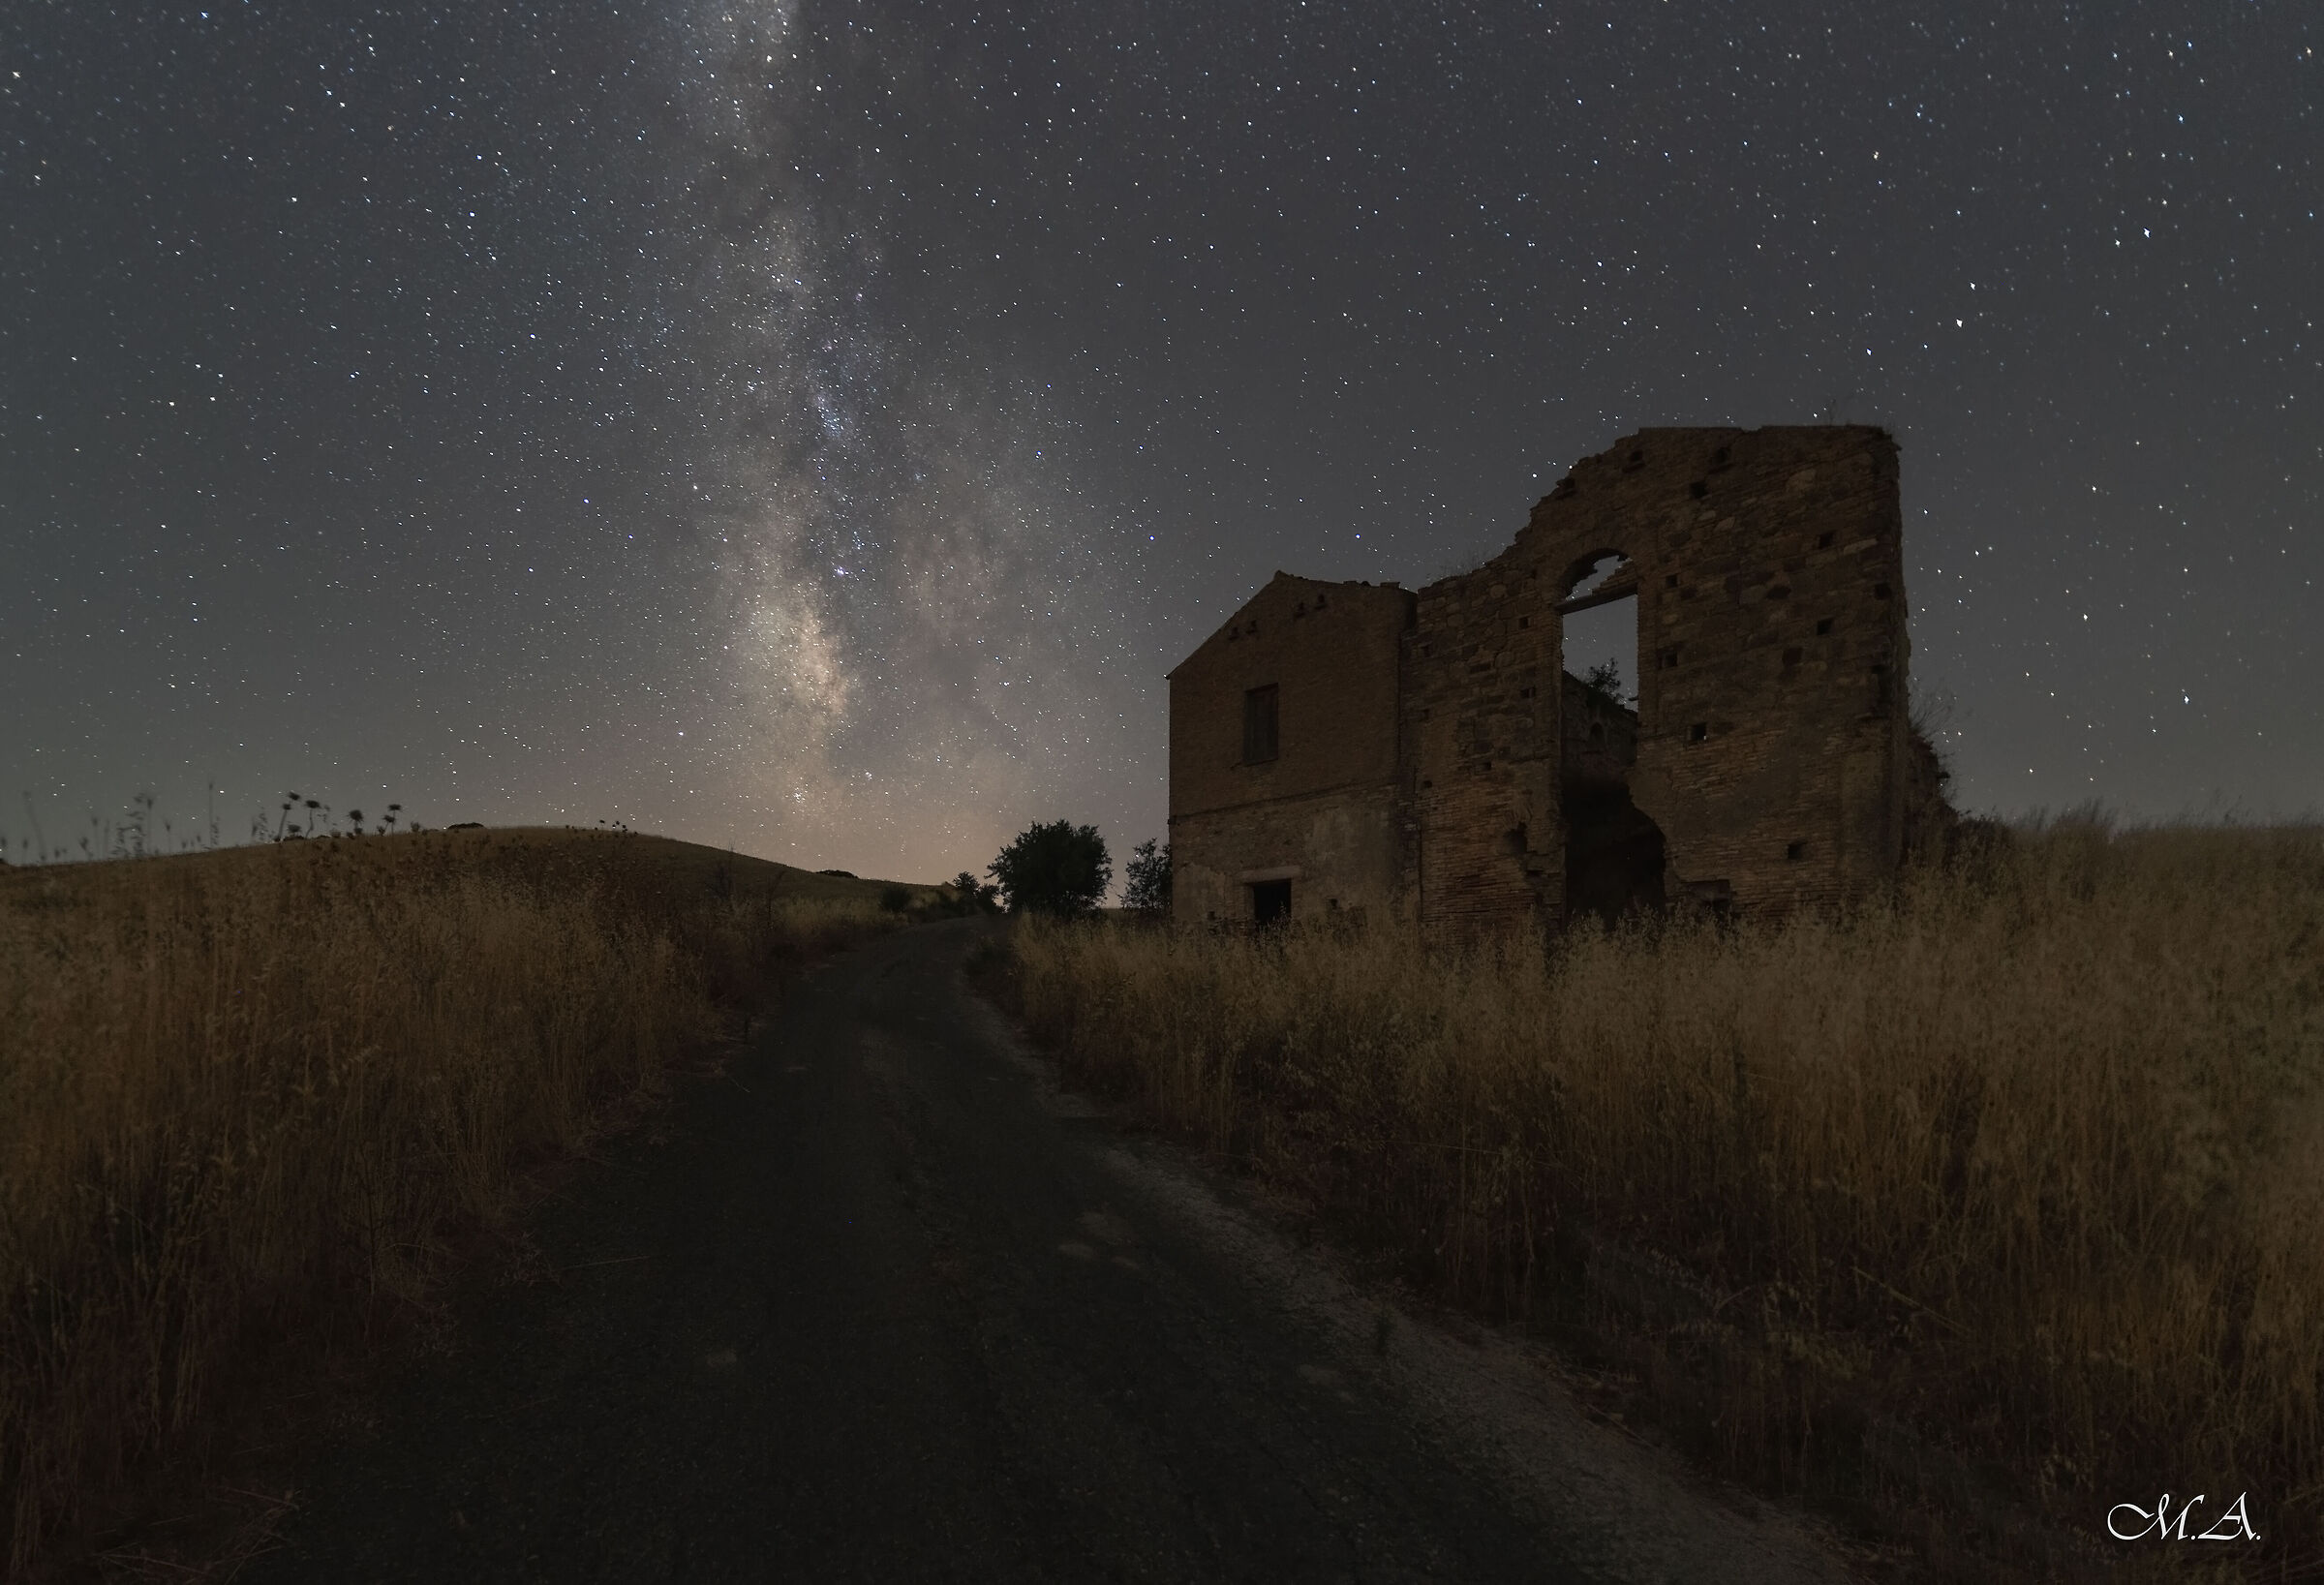 The Milky Way on the ruins...